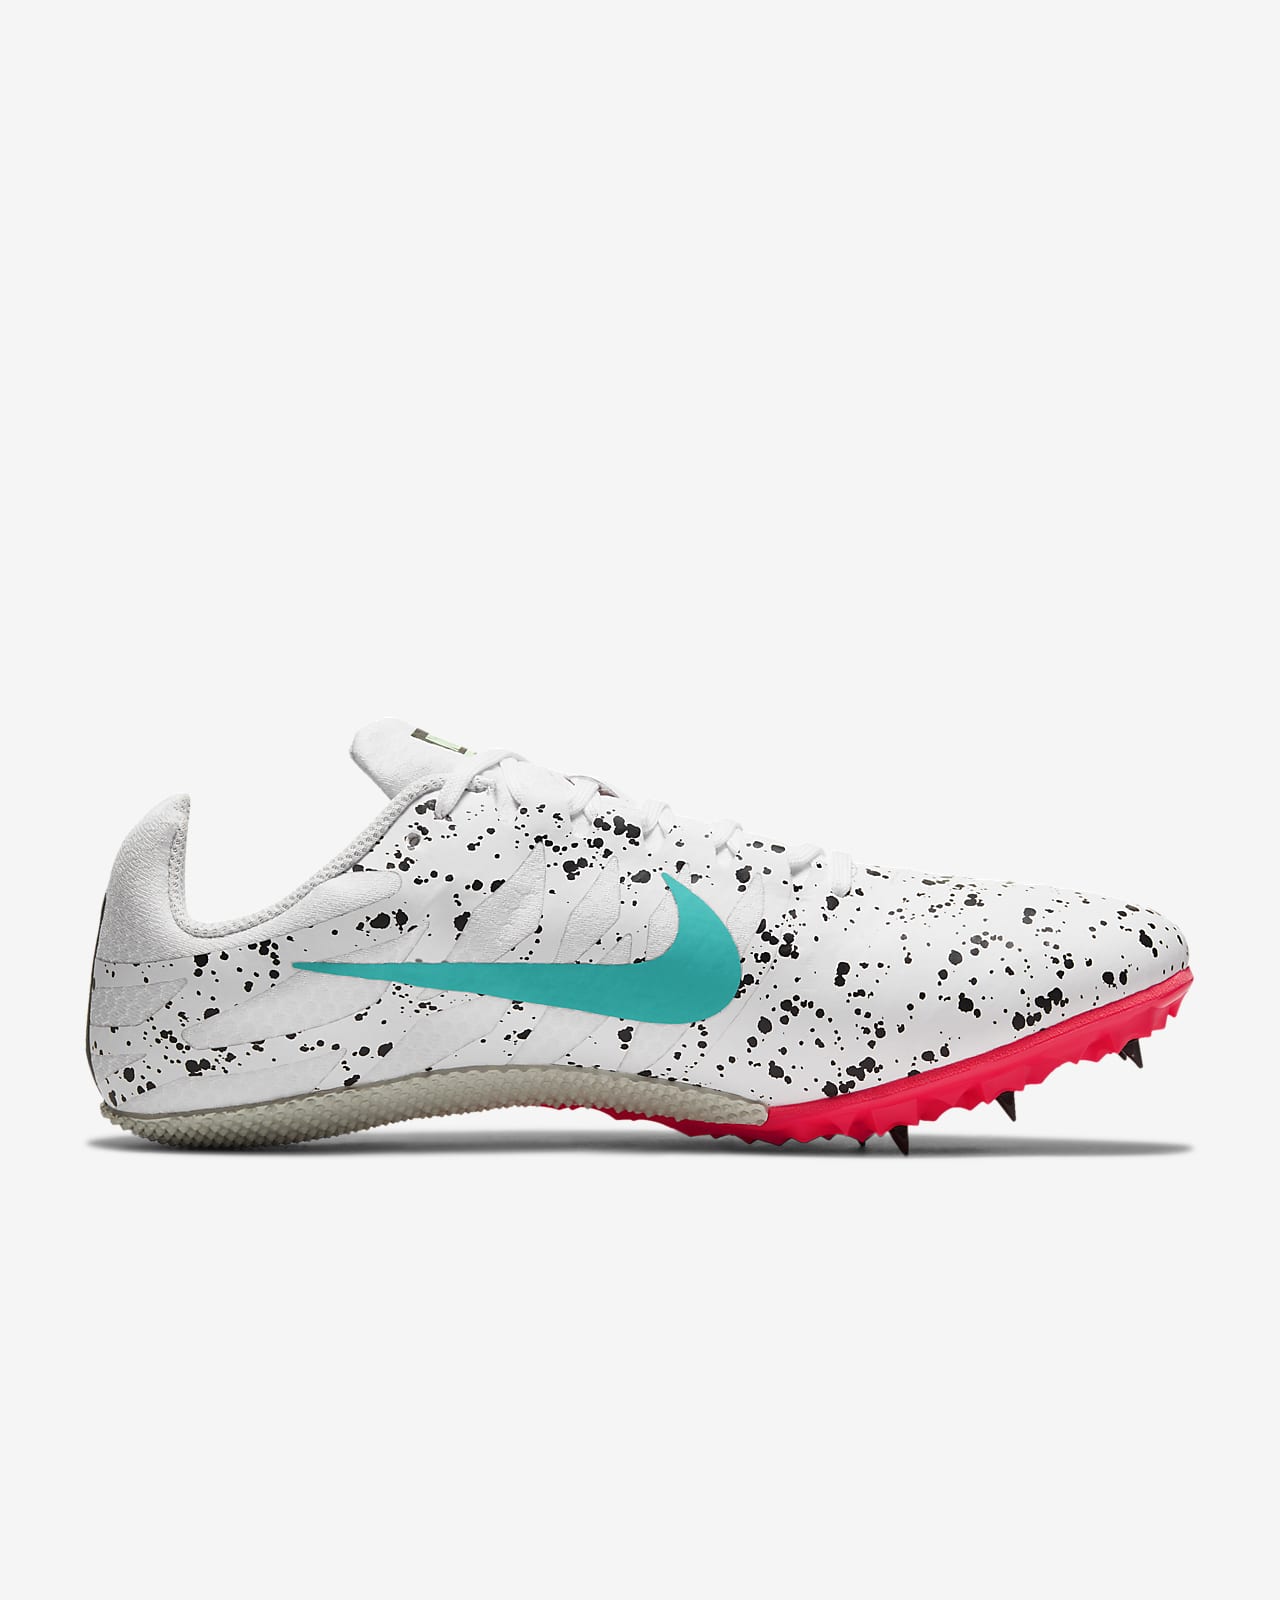 nike zoom rival s 9 running spikes